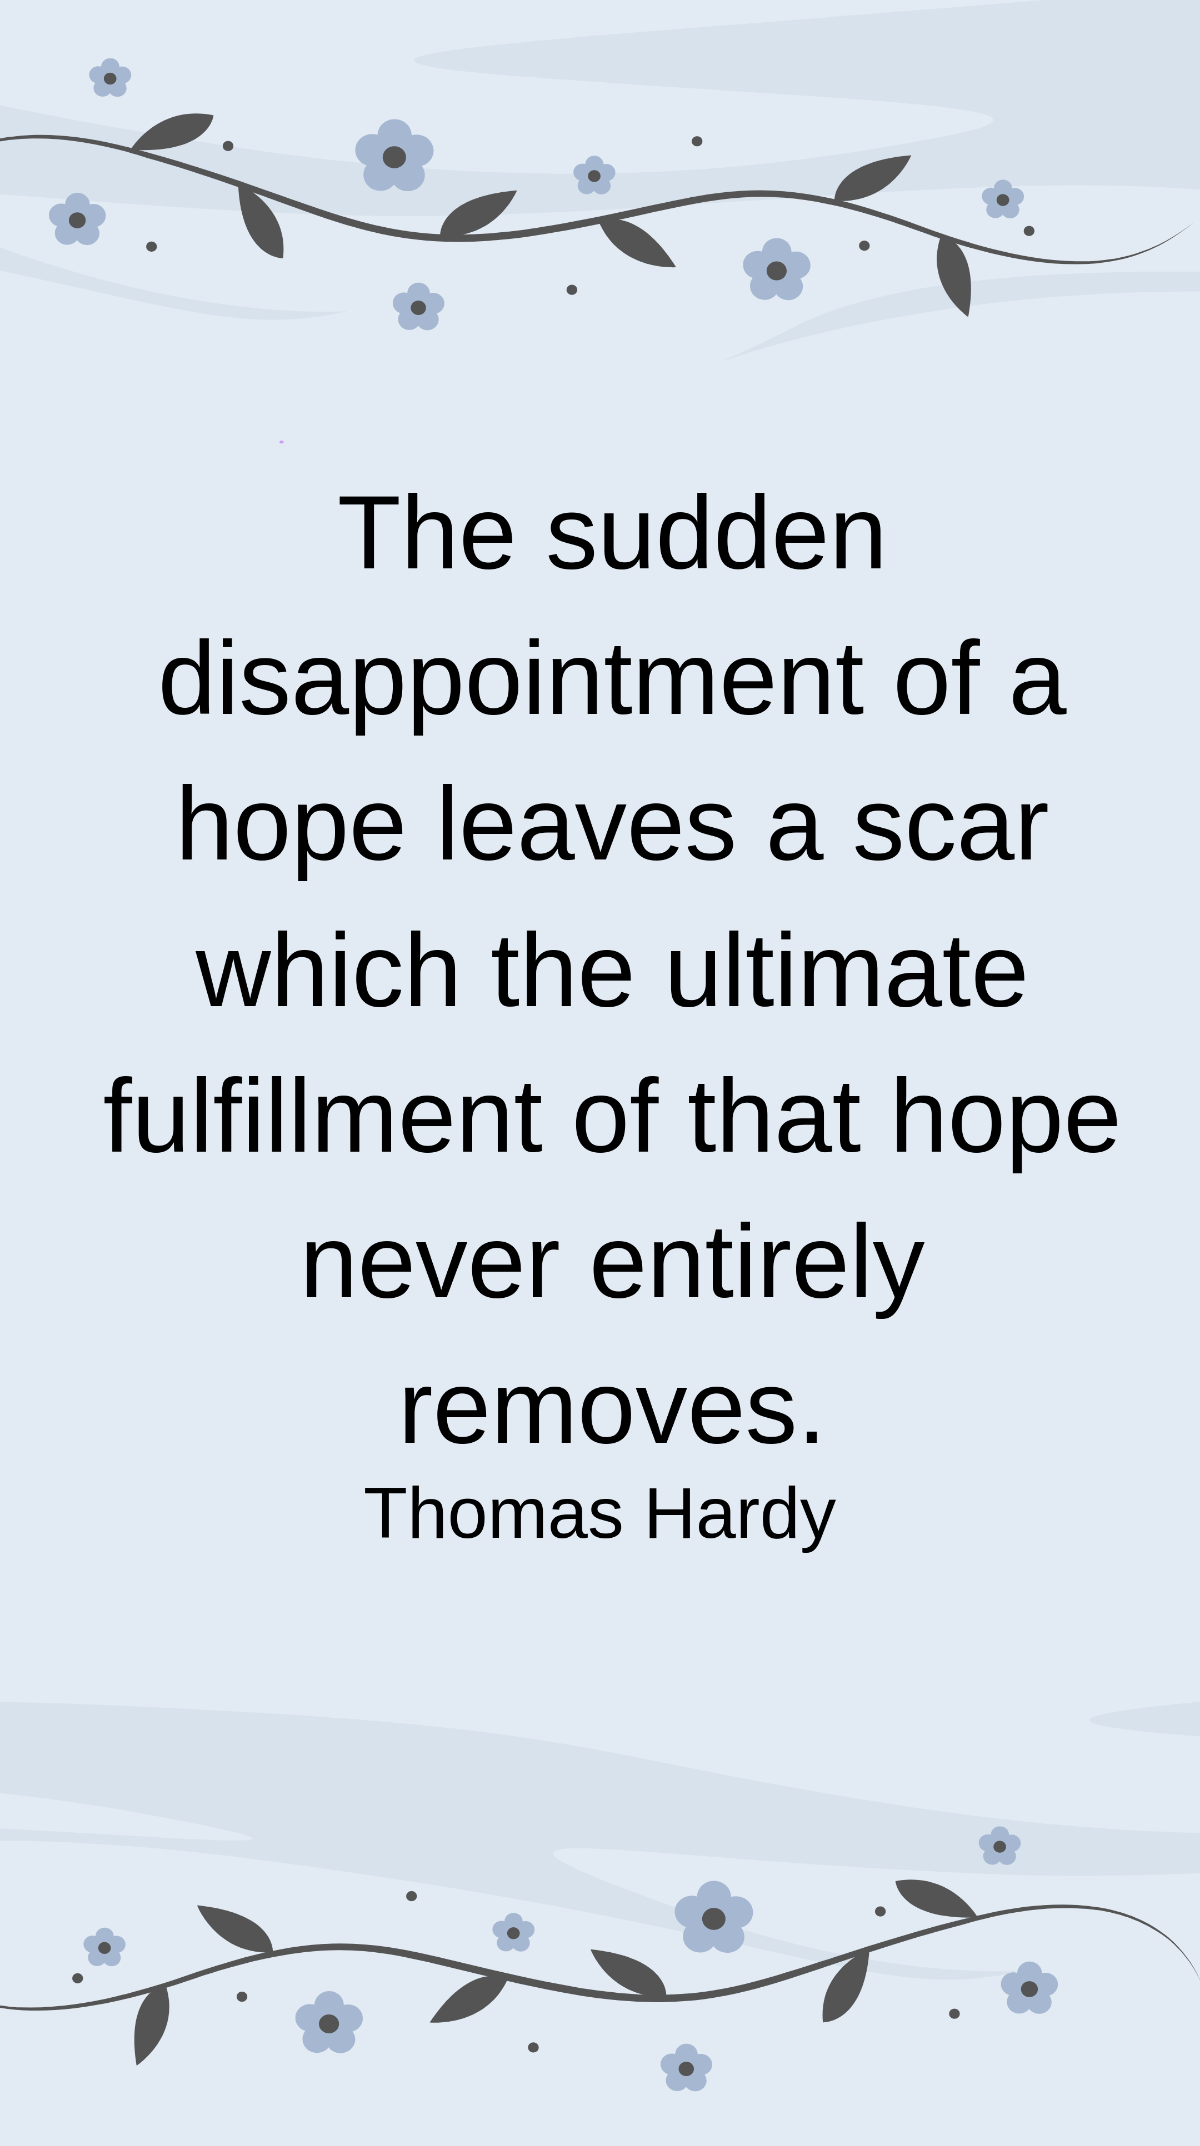 Thomas Hardy - The sudden disappointment of a hope leaves a scar which the ultimate fulfillment of that hope never entirely removes. Template